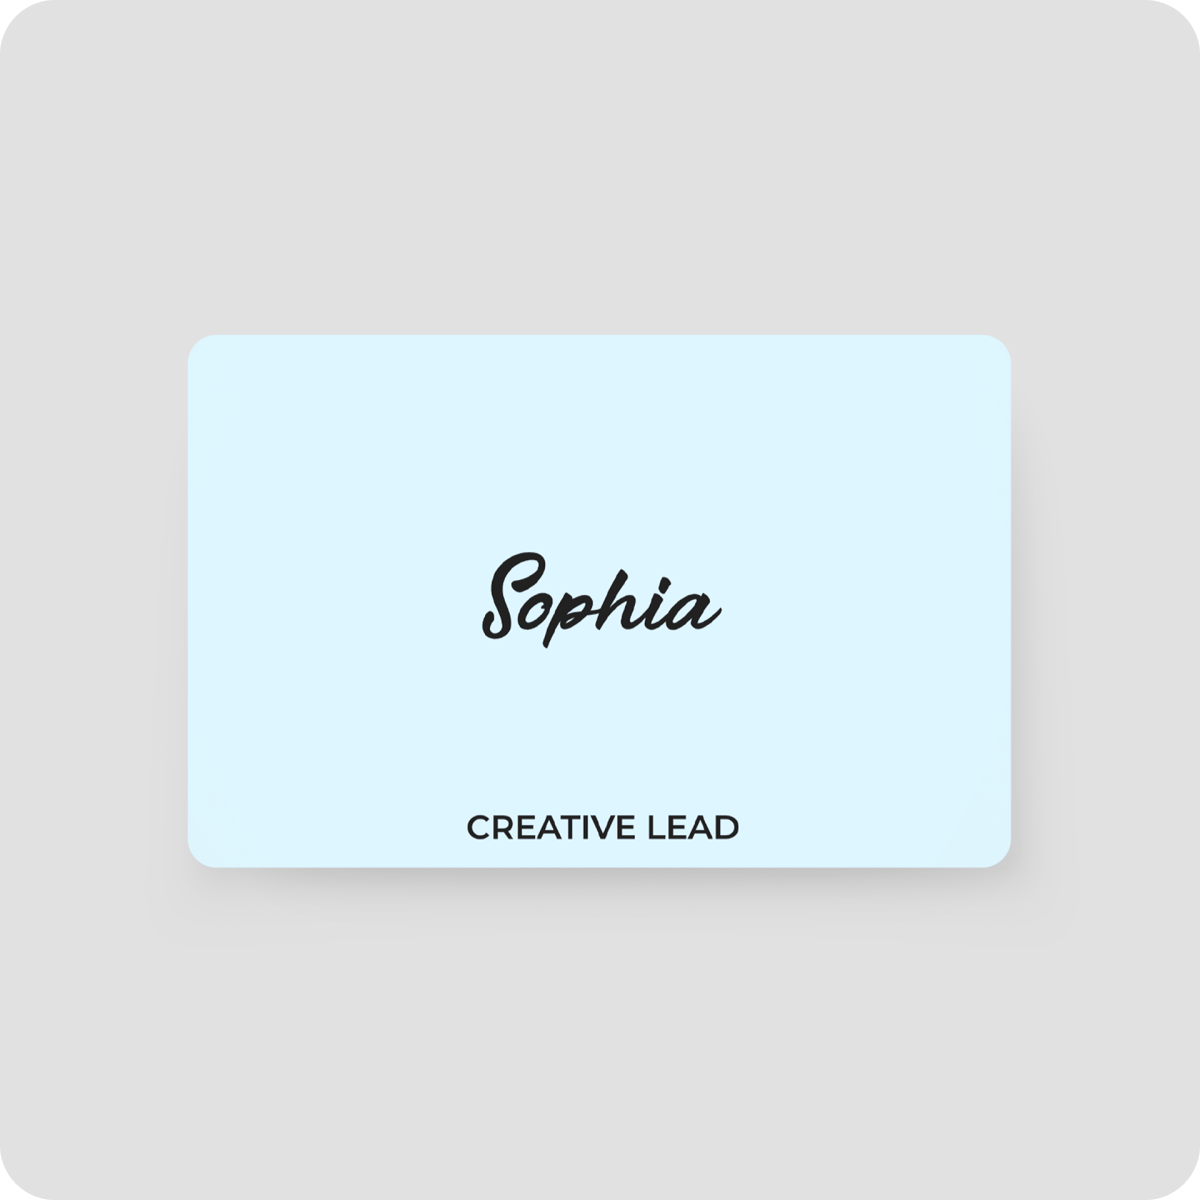 One Good Card: Smart Digital Name Card (Marker) - Personalised Near Field Communication (NFC) Digital Business Cards designs - Baby Blue